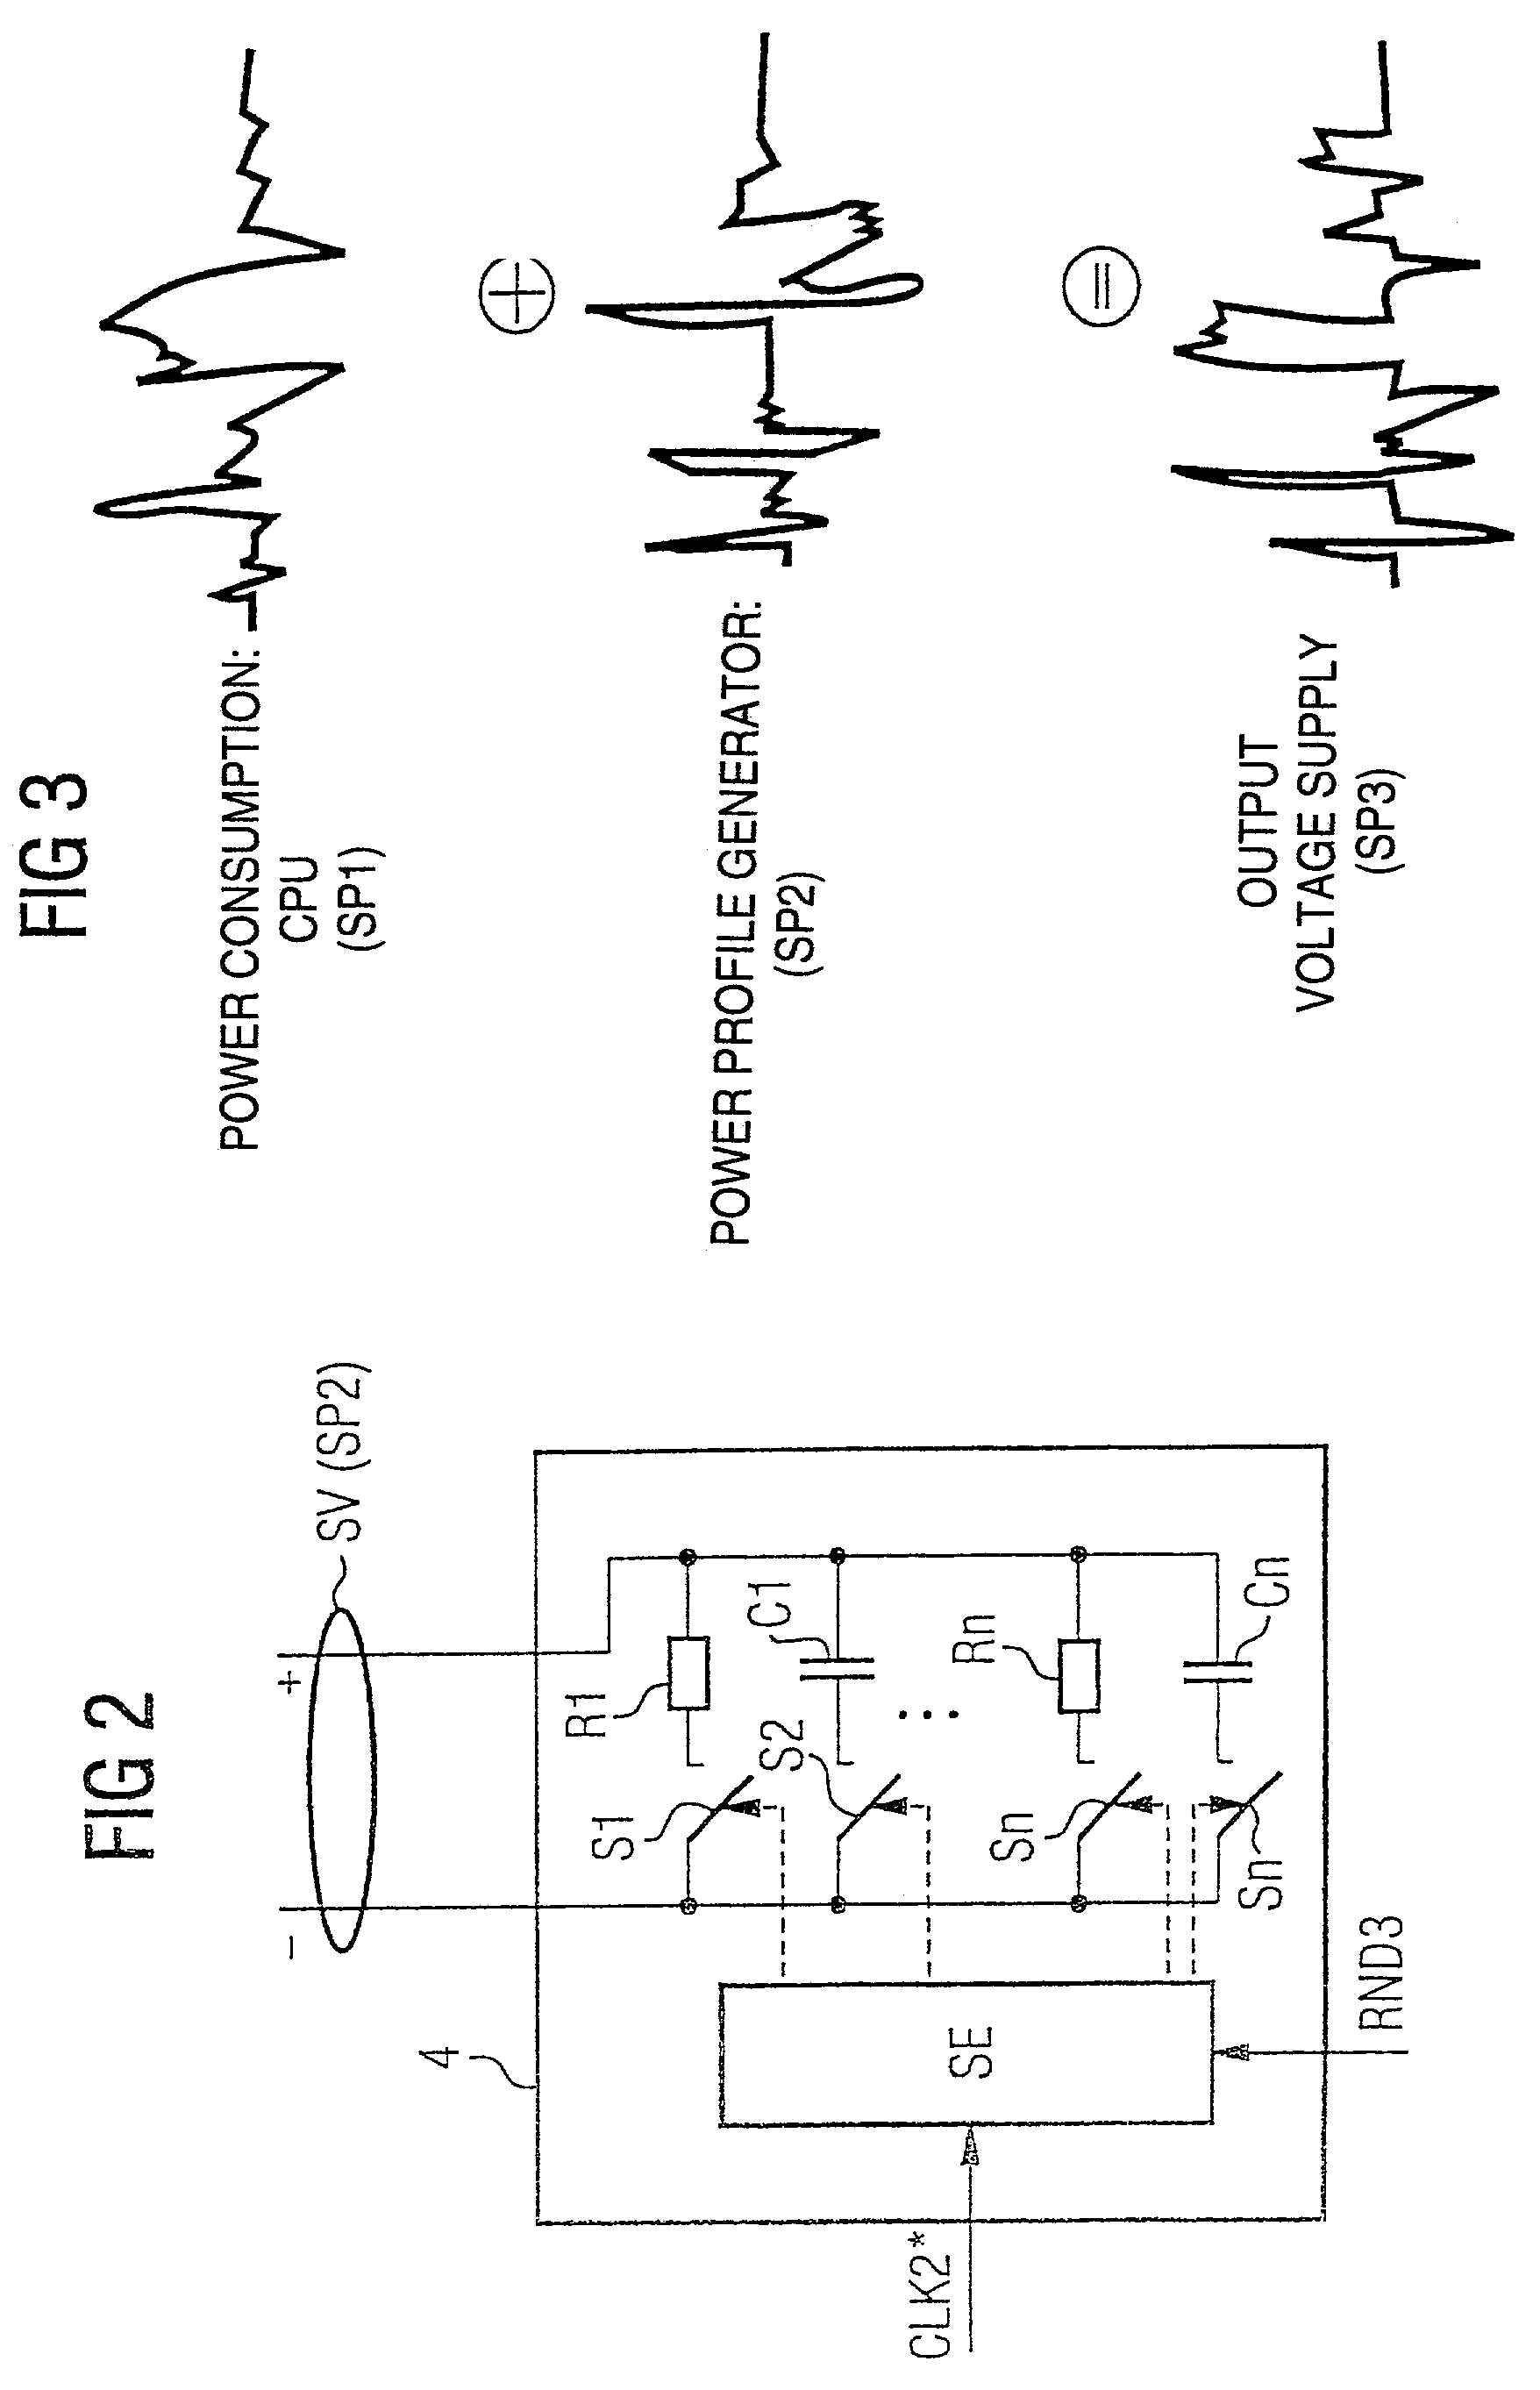 Power analysis resistant coding device